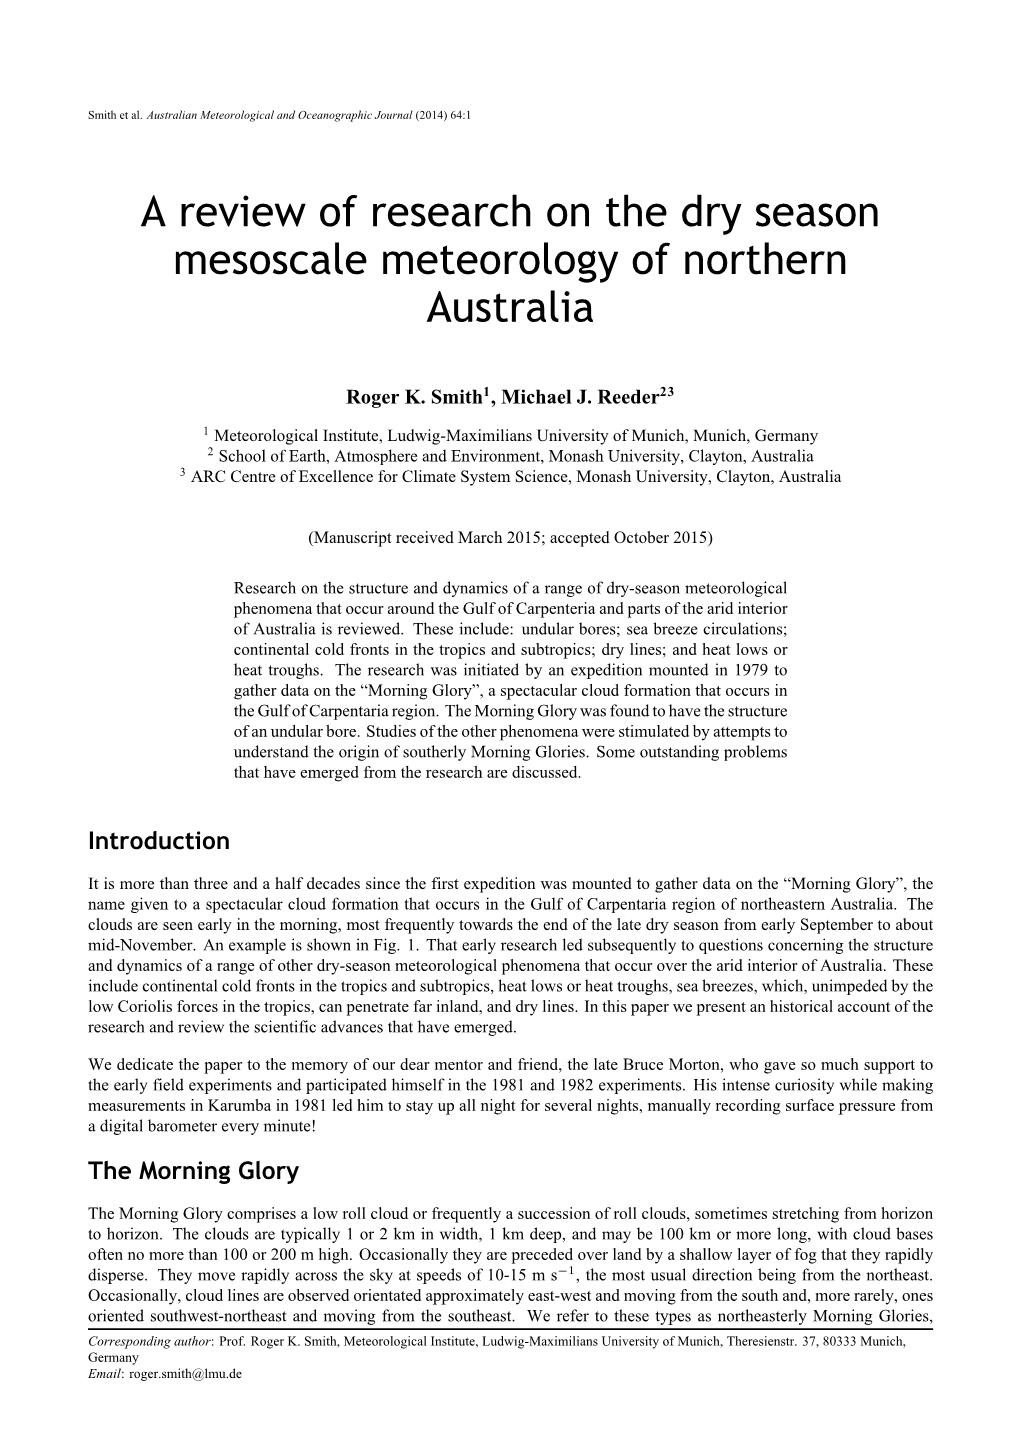 A Review of Research on the Dry Season Mesoscale Meteorology of Northern Australia